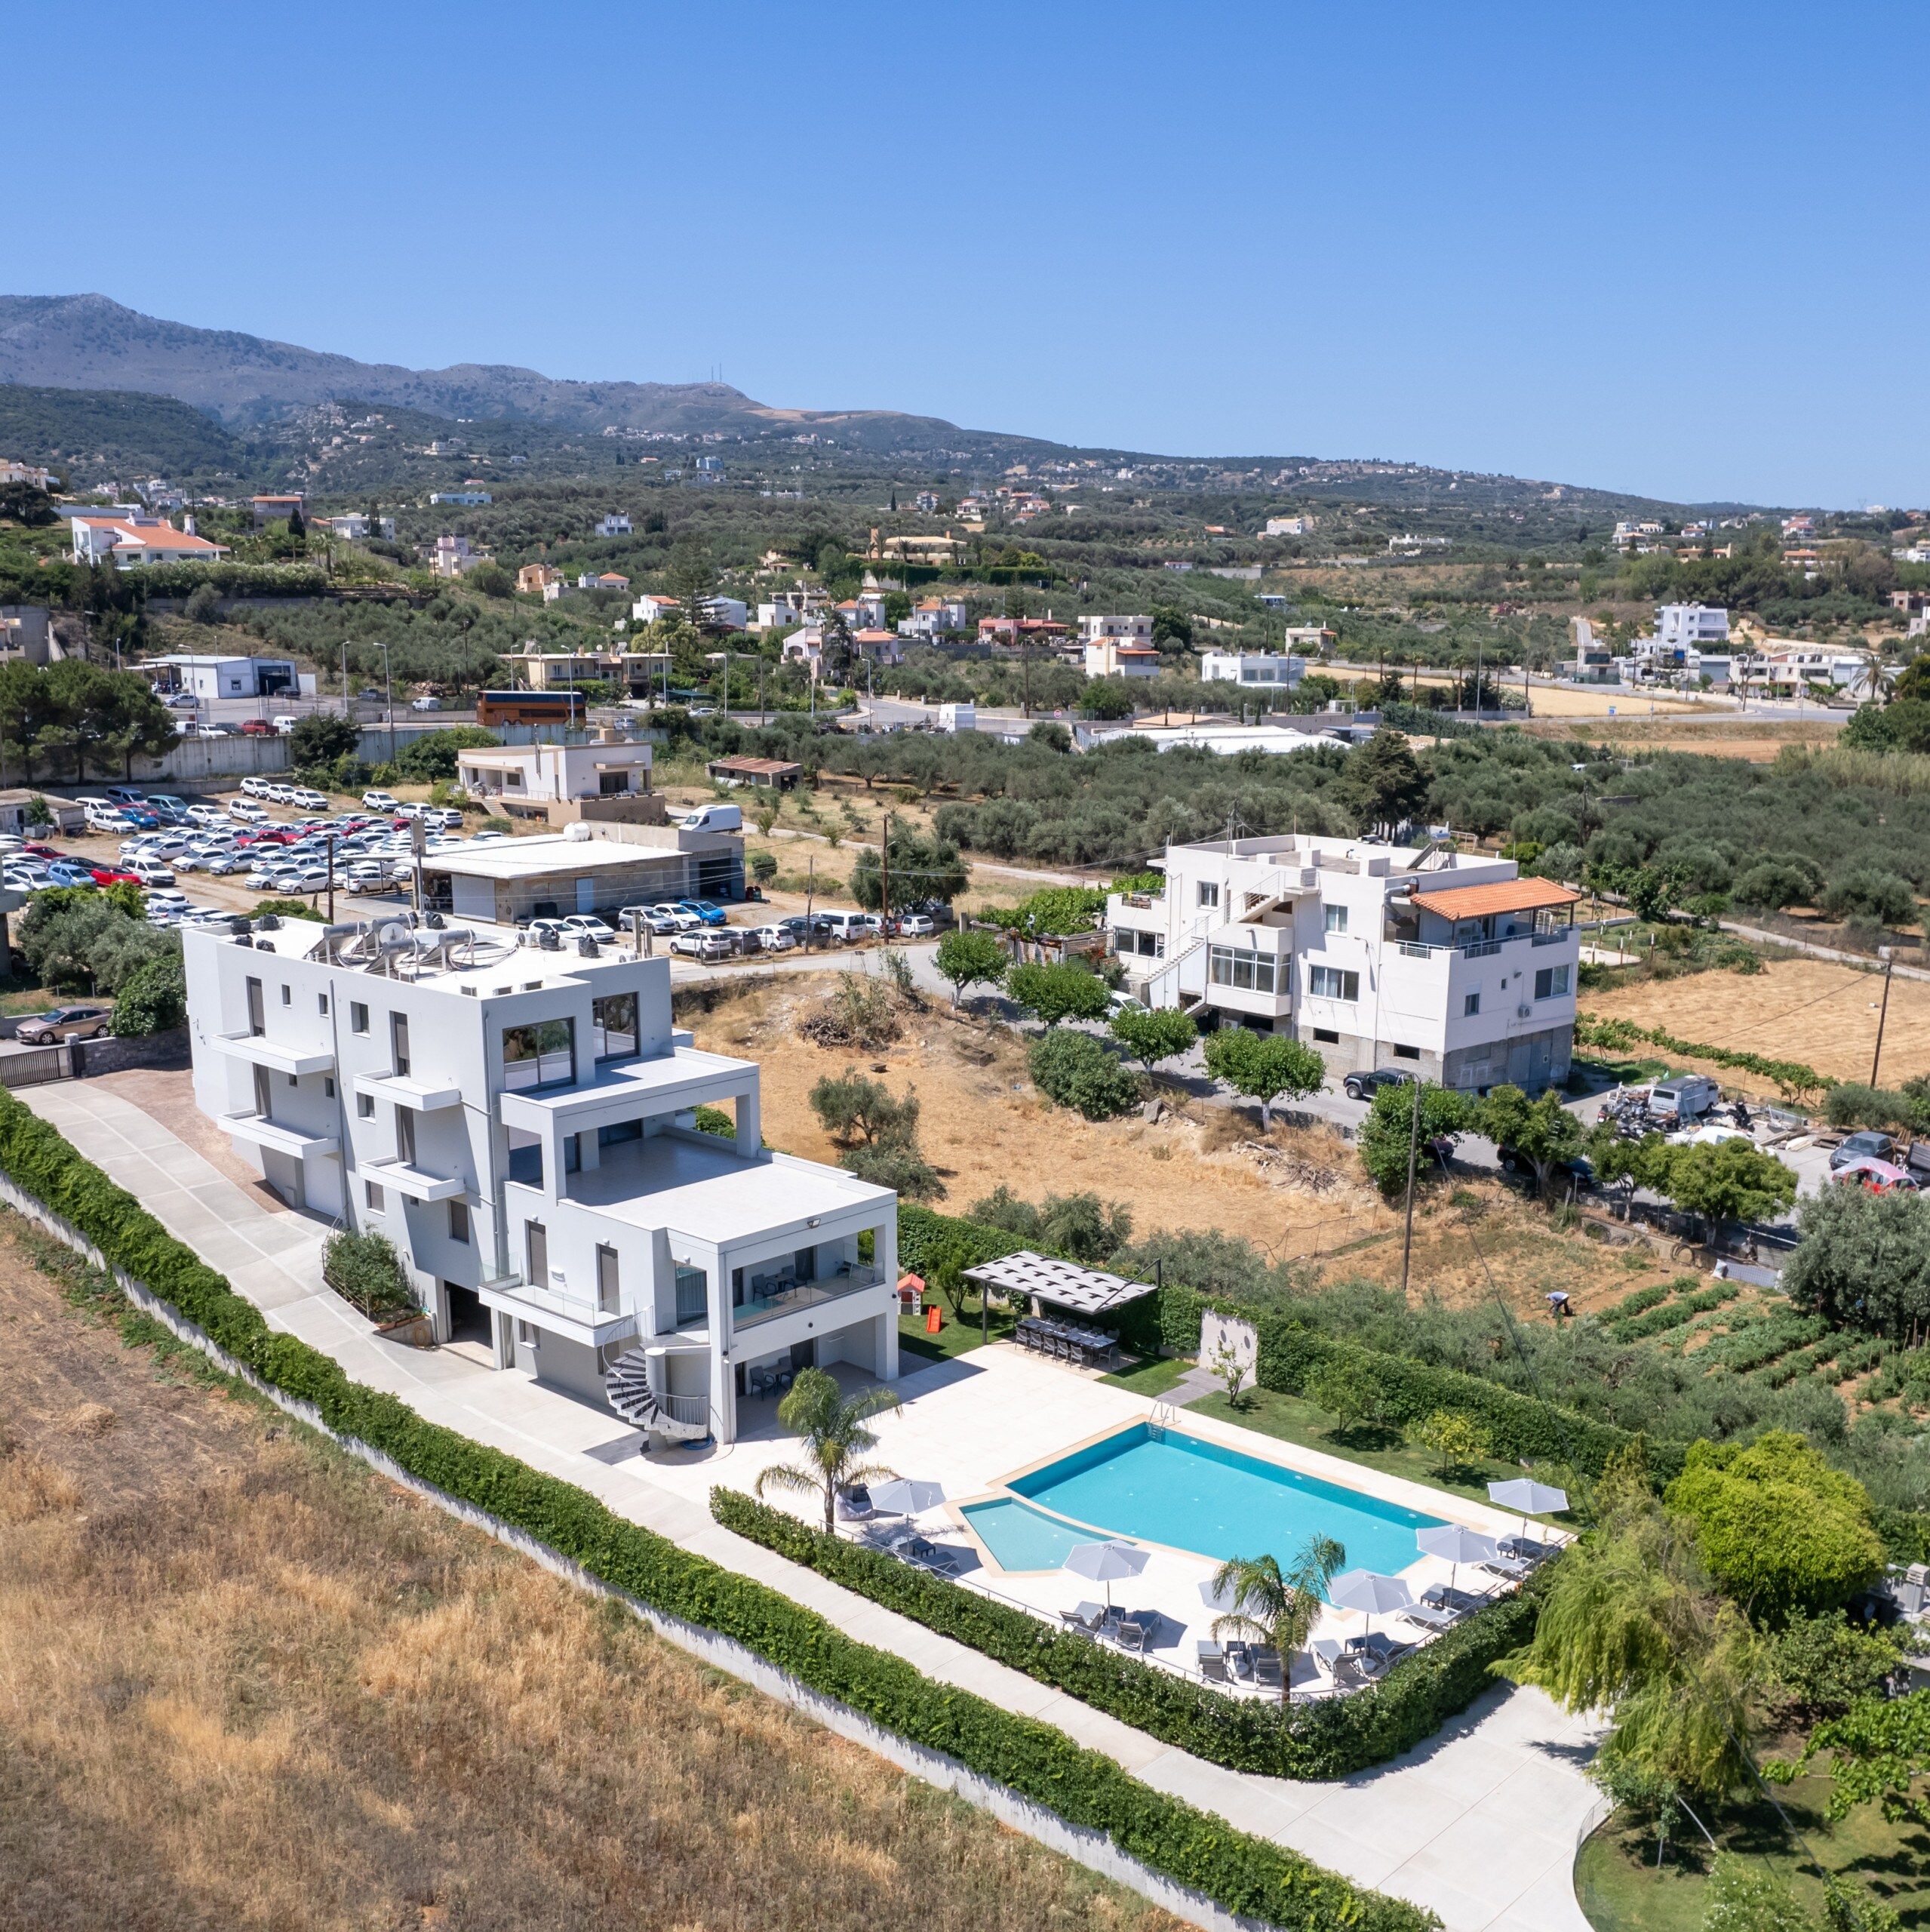 
Exterior view & private Swimming pool of Modern 3 apts Villa,Huge Swimming pool,Near all amenities,Rethymno,Crete,Greece 